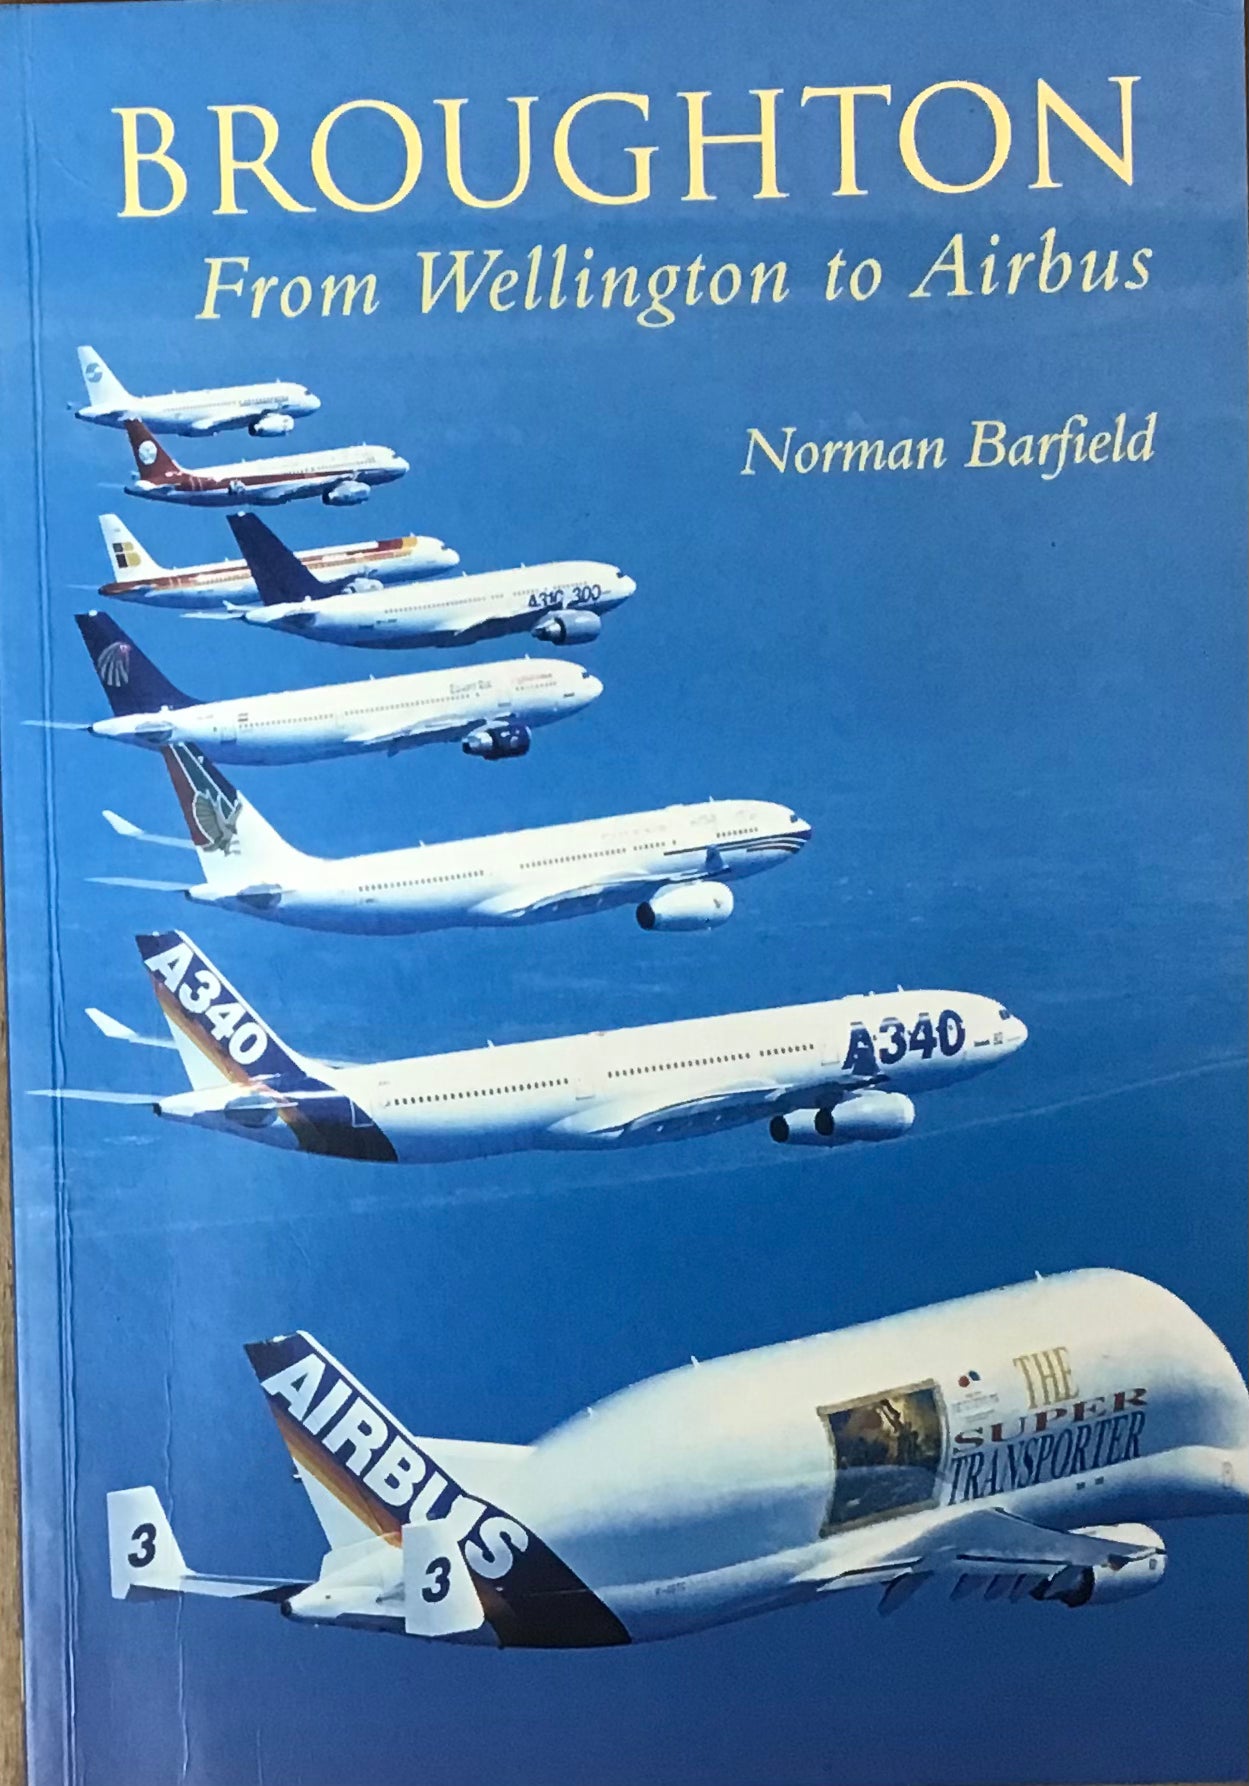 Broughton From Wellington to Airbus by Norman Barfield - Chester Model Centre